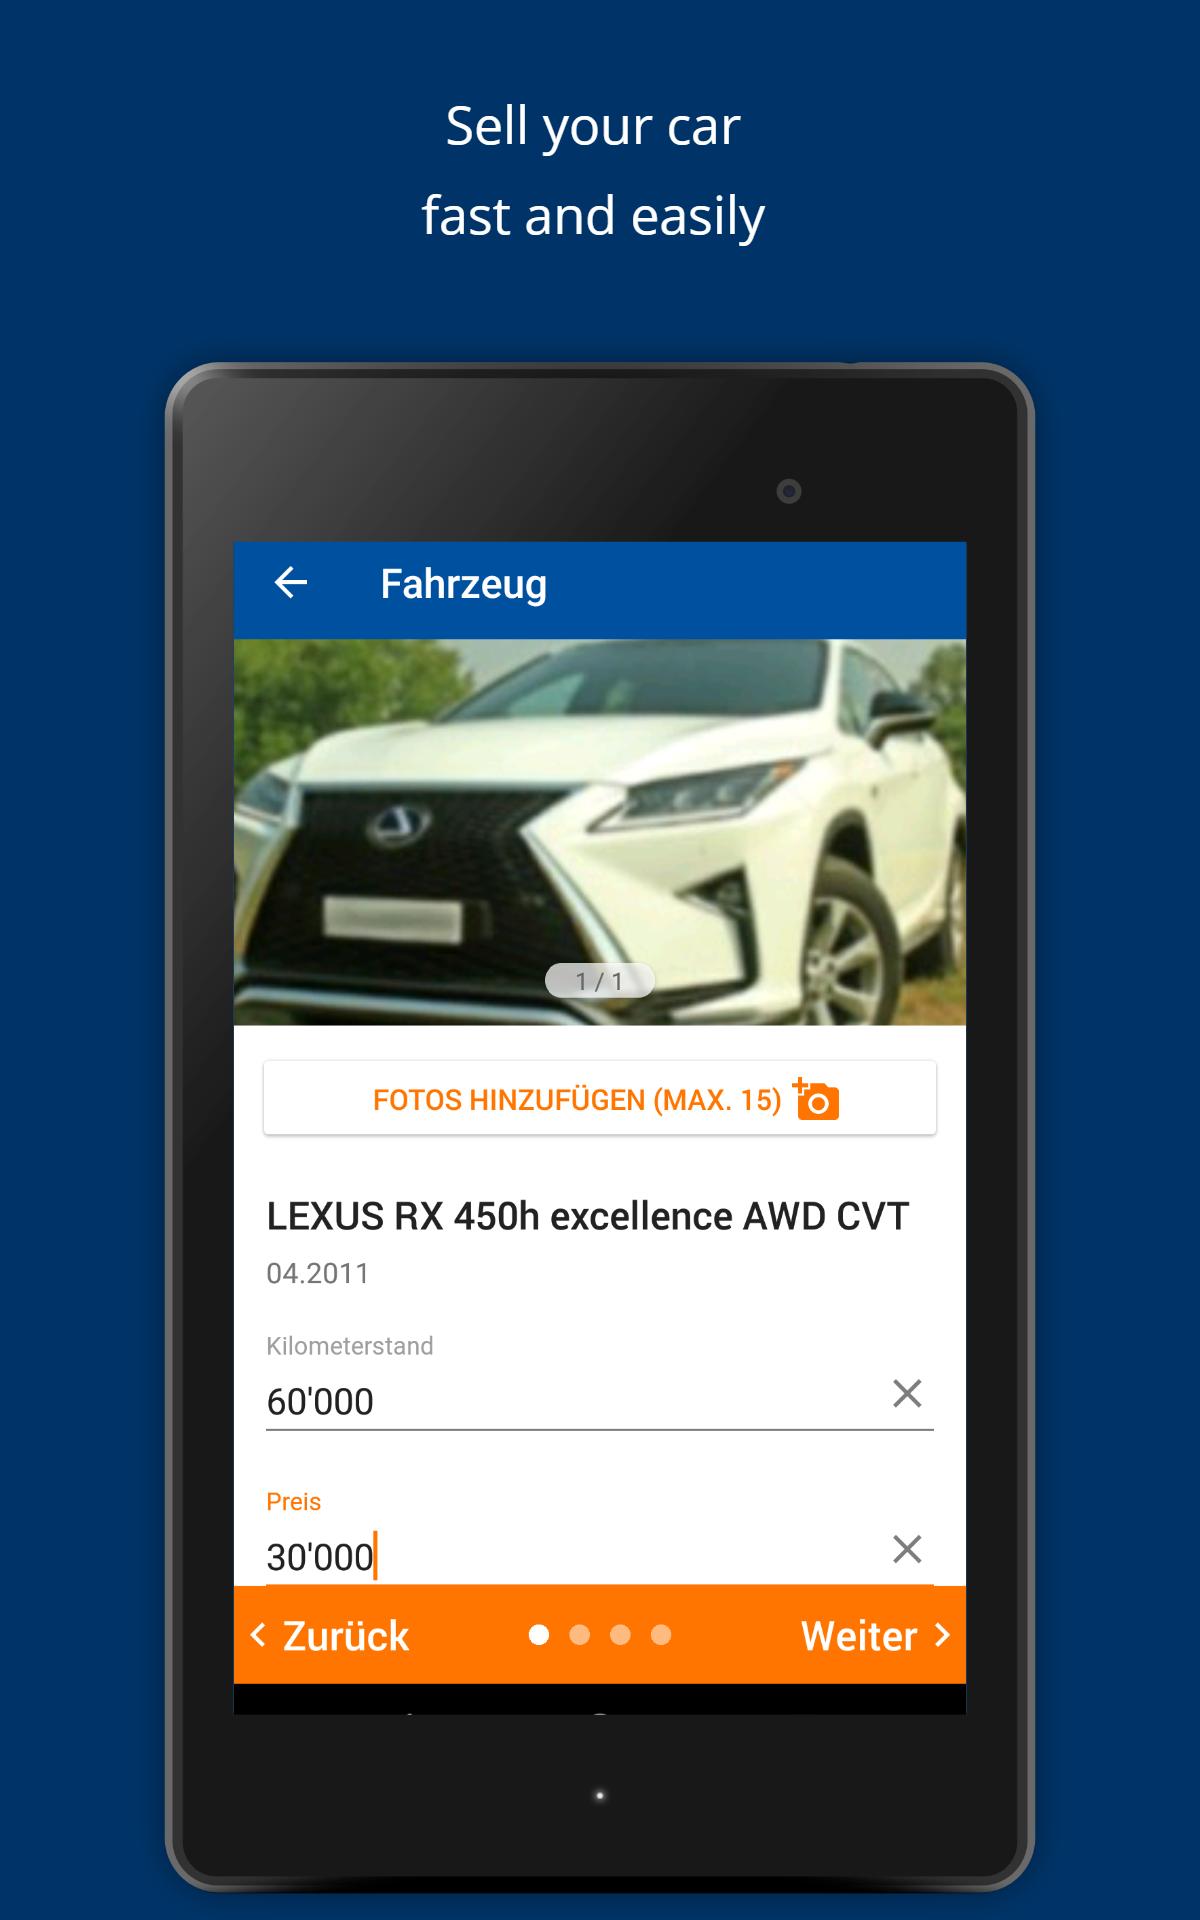 AutoScout24 Switzerland – Find your new car 4.0.0 Screenshot 20